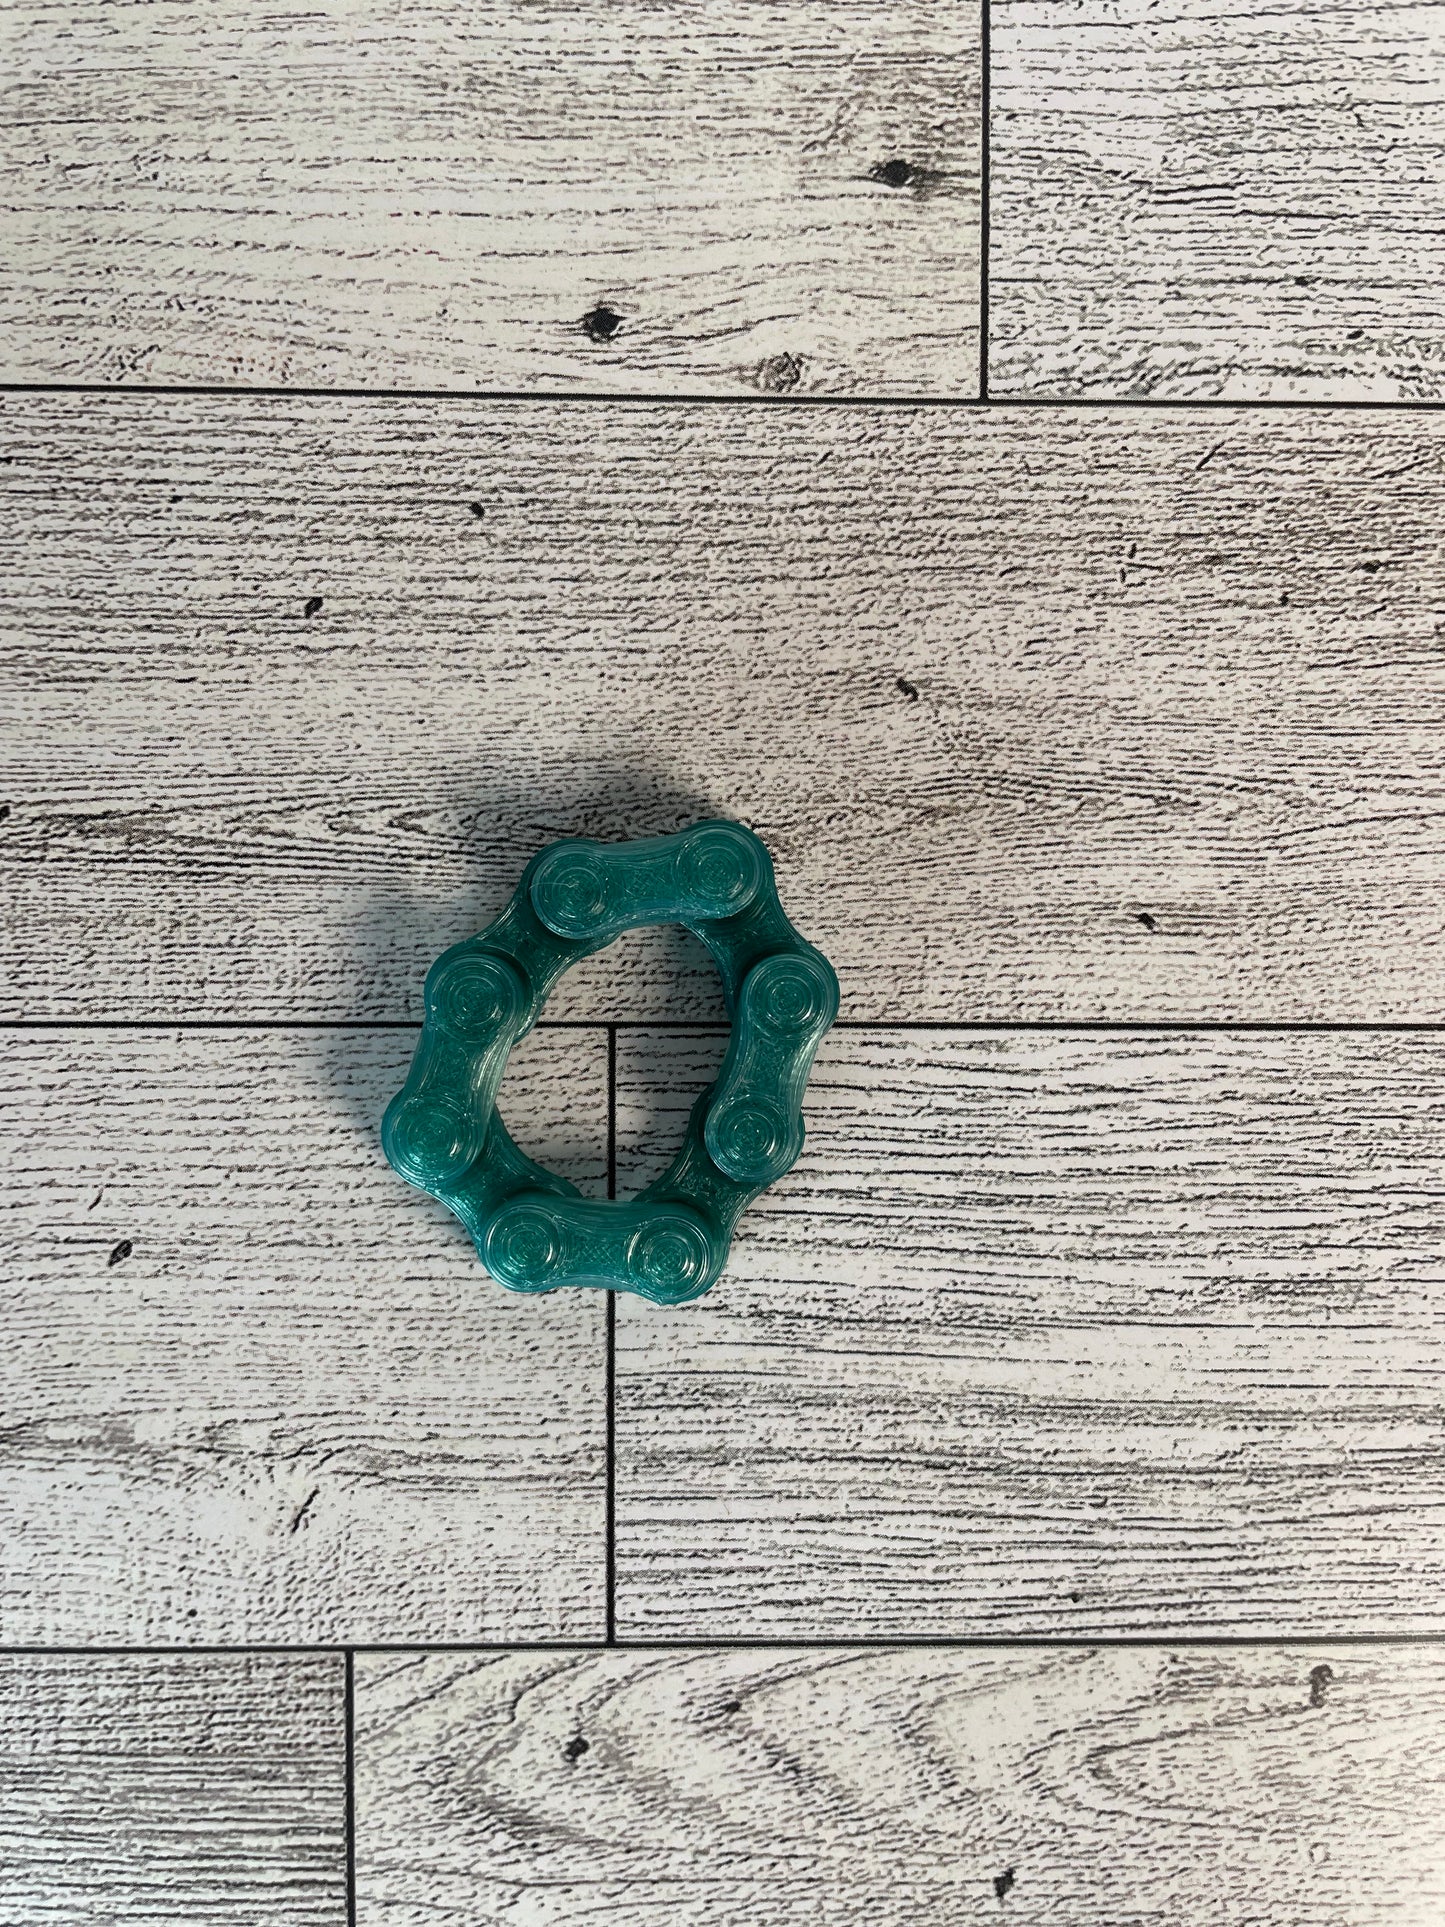 A translucent green chain link on a wood backdrop. The chain is arranged in a circle shape and there are four links